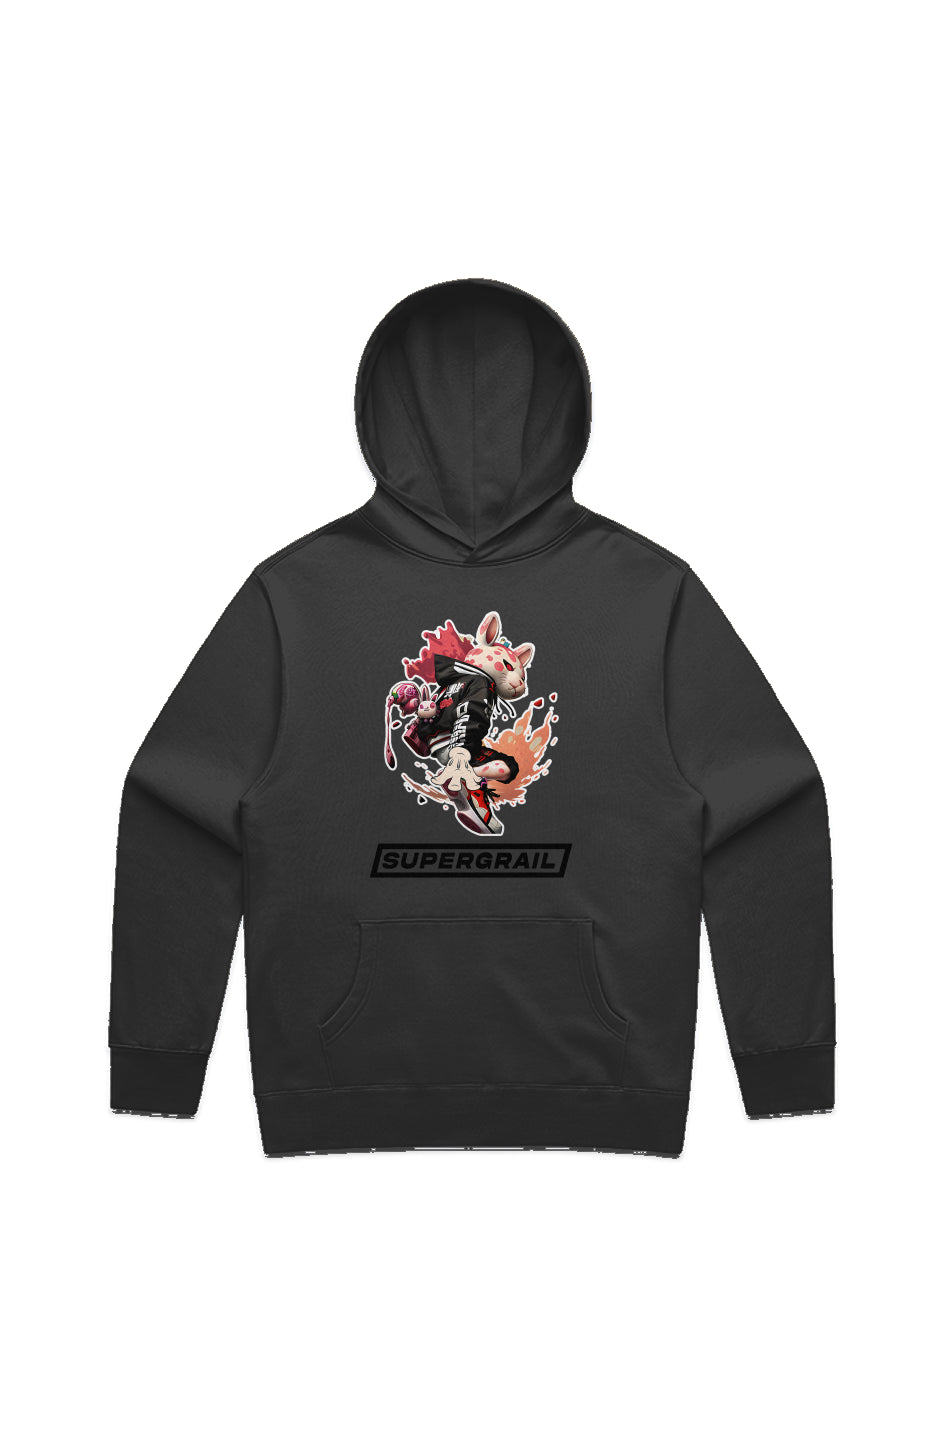 Supergrail Flying Bunny Relaxed Hoodie (Black)